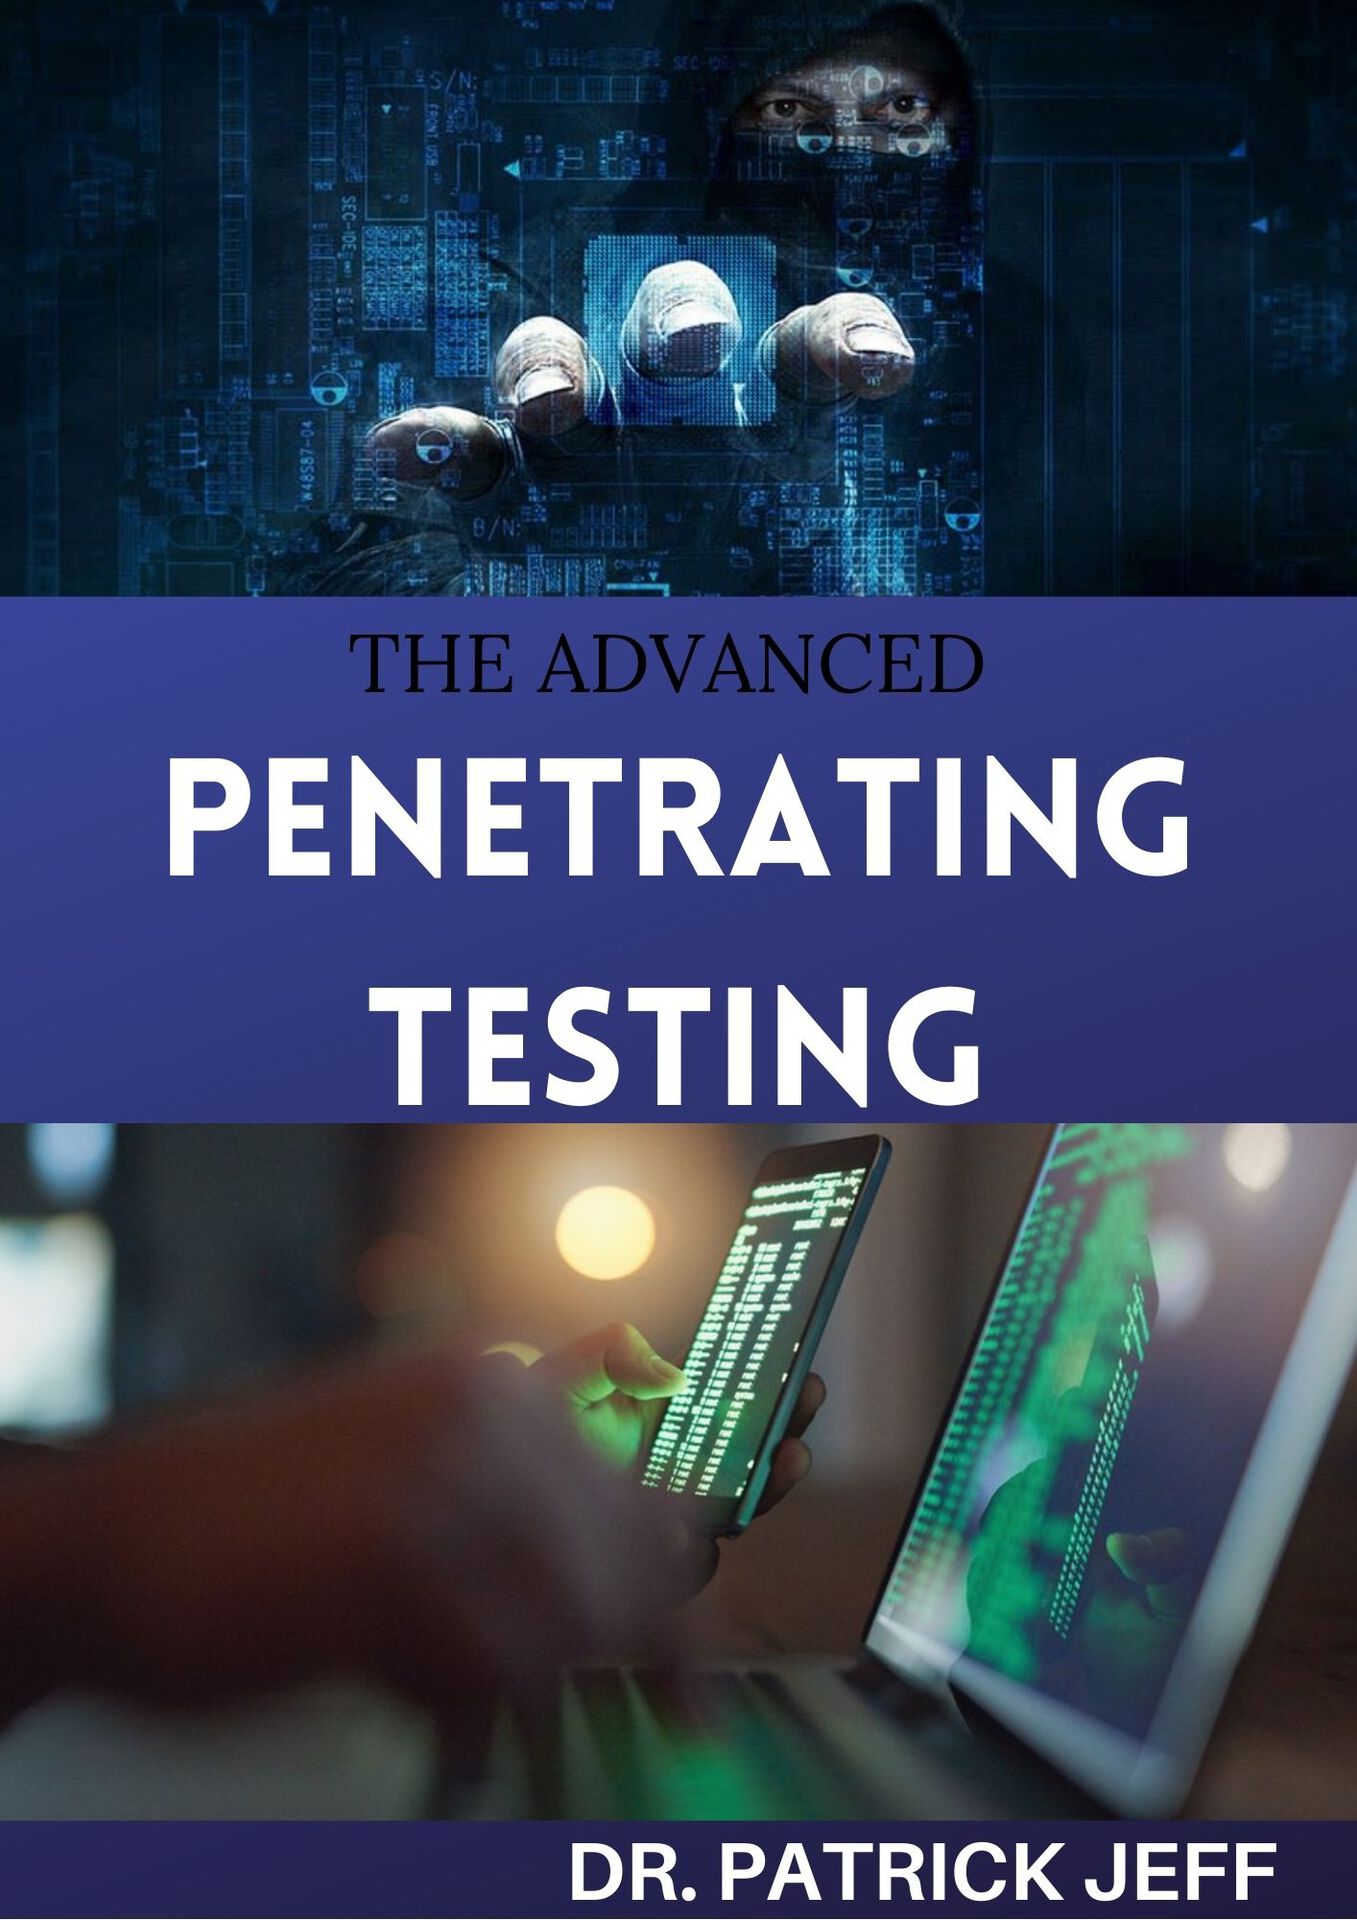 The Advanced Penetrating Testing: Step-By-Step Guide to Ethical Hacking and Penetration Testing Made Easy